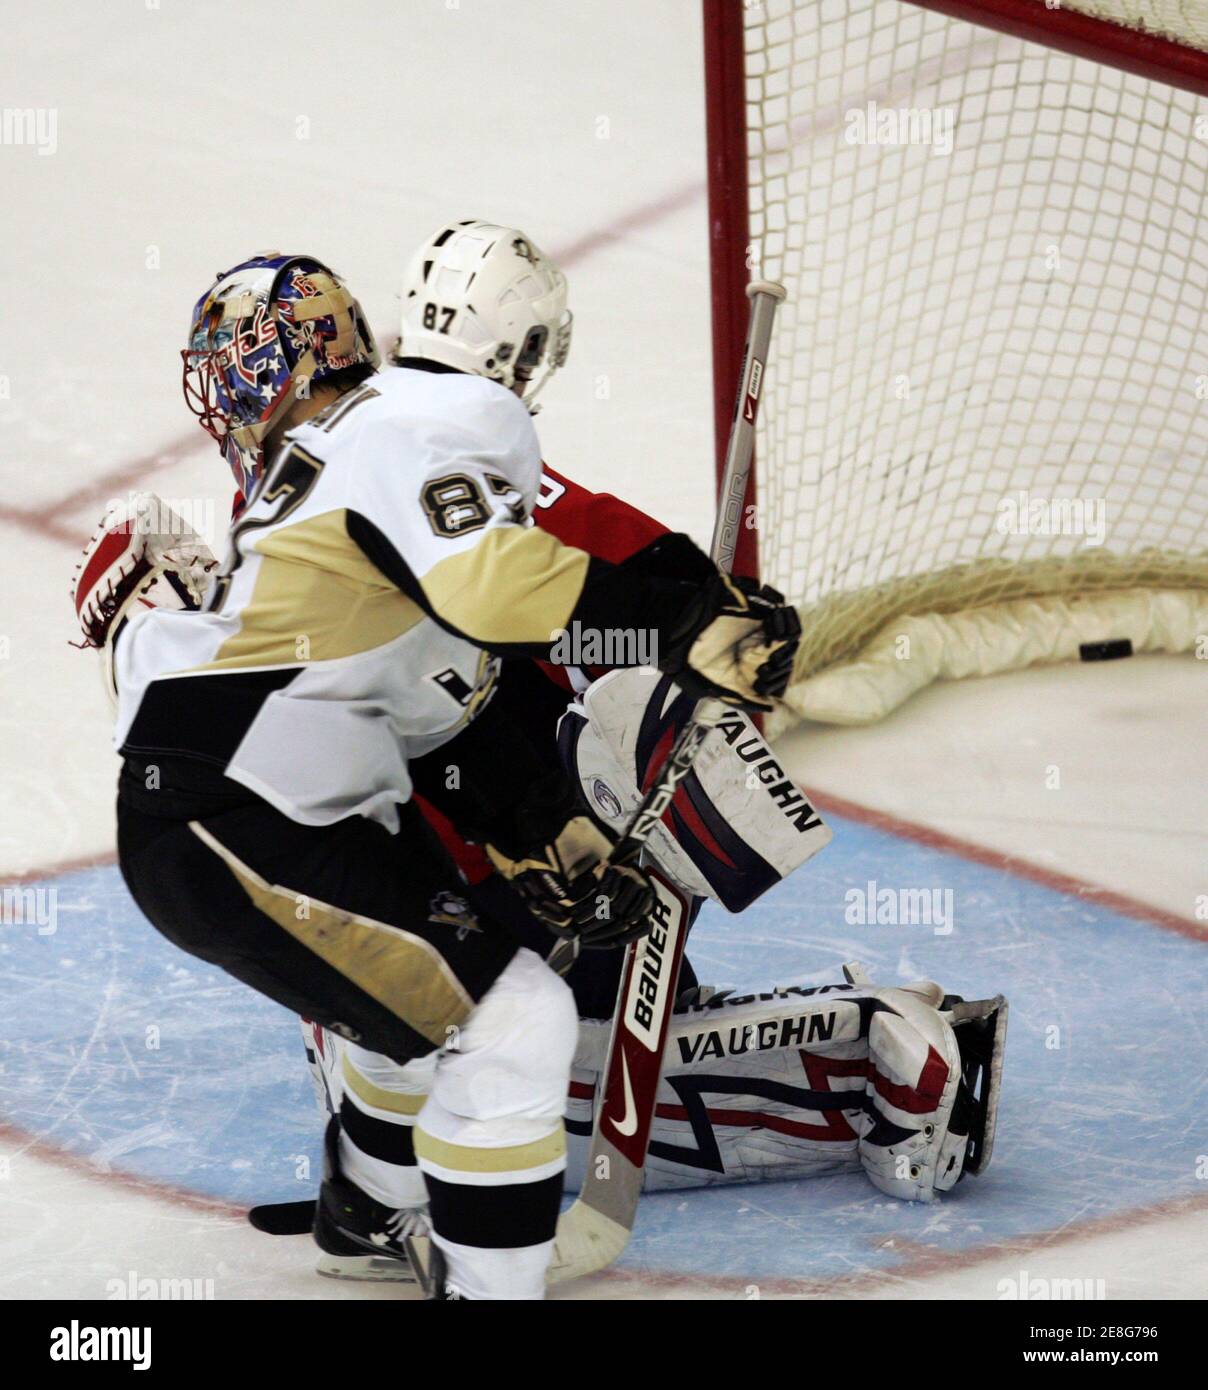 Pittsburgh Penguins' Sidney Crosby (front) scores on Washington Capitals goaltender Jose Theodore in the shootout of their NHL hockey game in Washington, March 8, 2009. The Penguins won the game, 4-3, in the shootout.   REUTERS/Gary Cameron    (UNITED STATES) Stock Photo